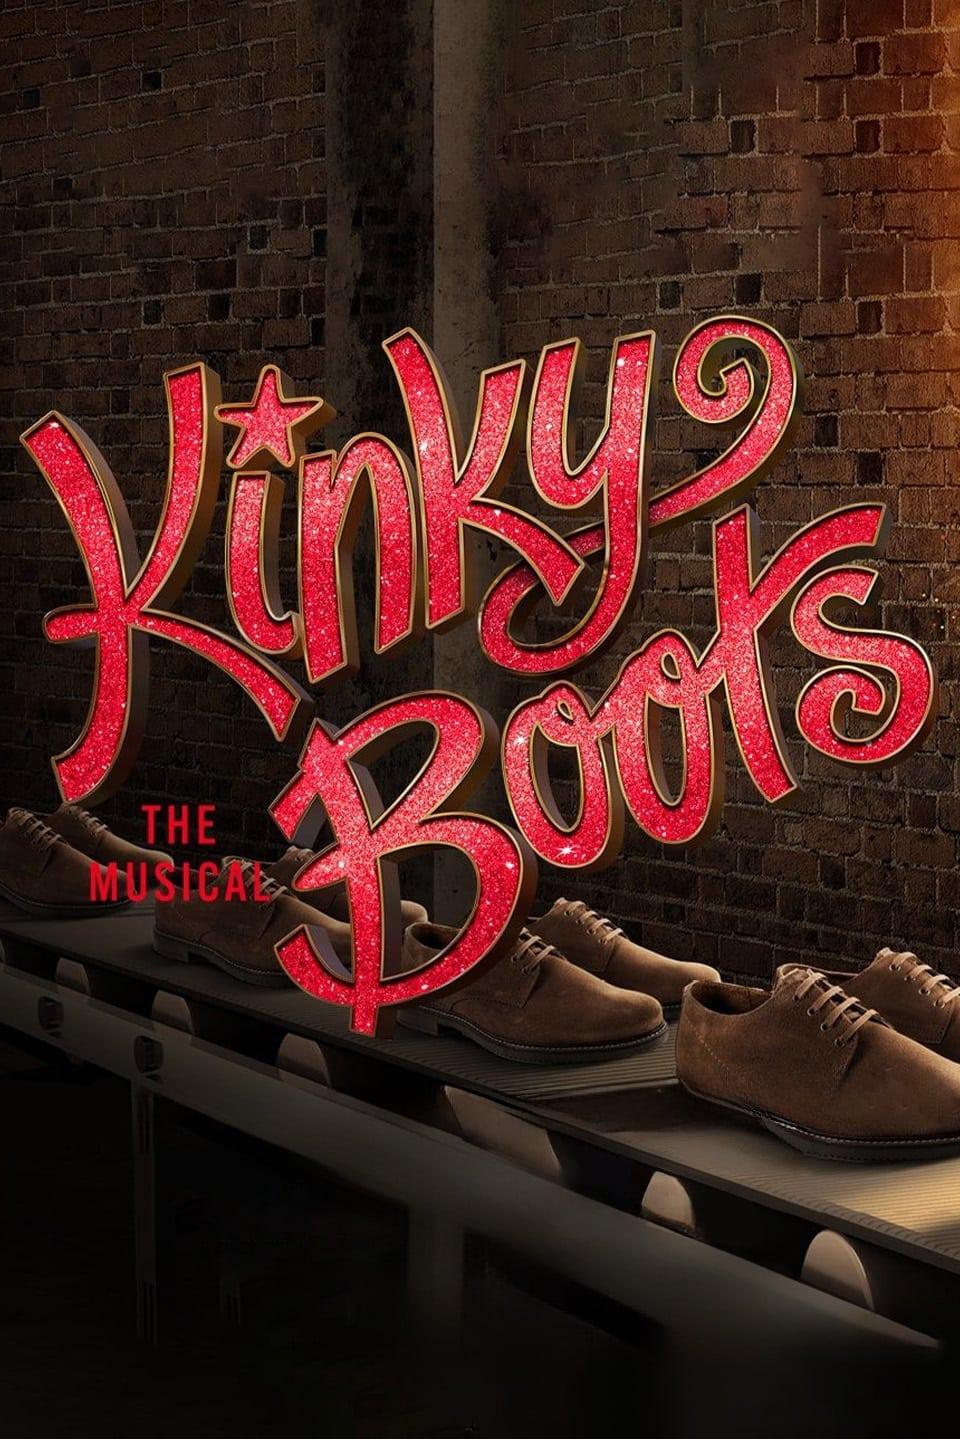 Kinky Boots: The Musical poster